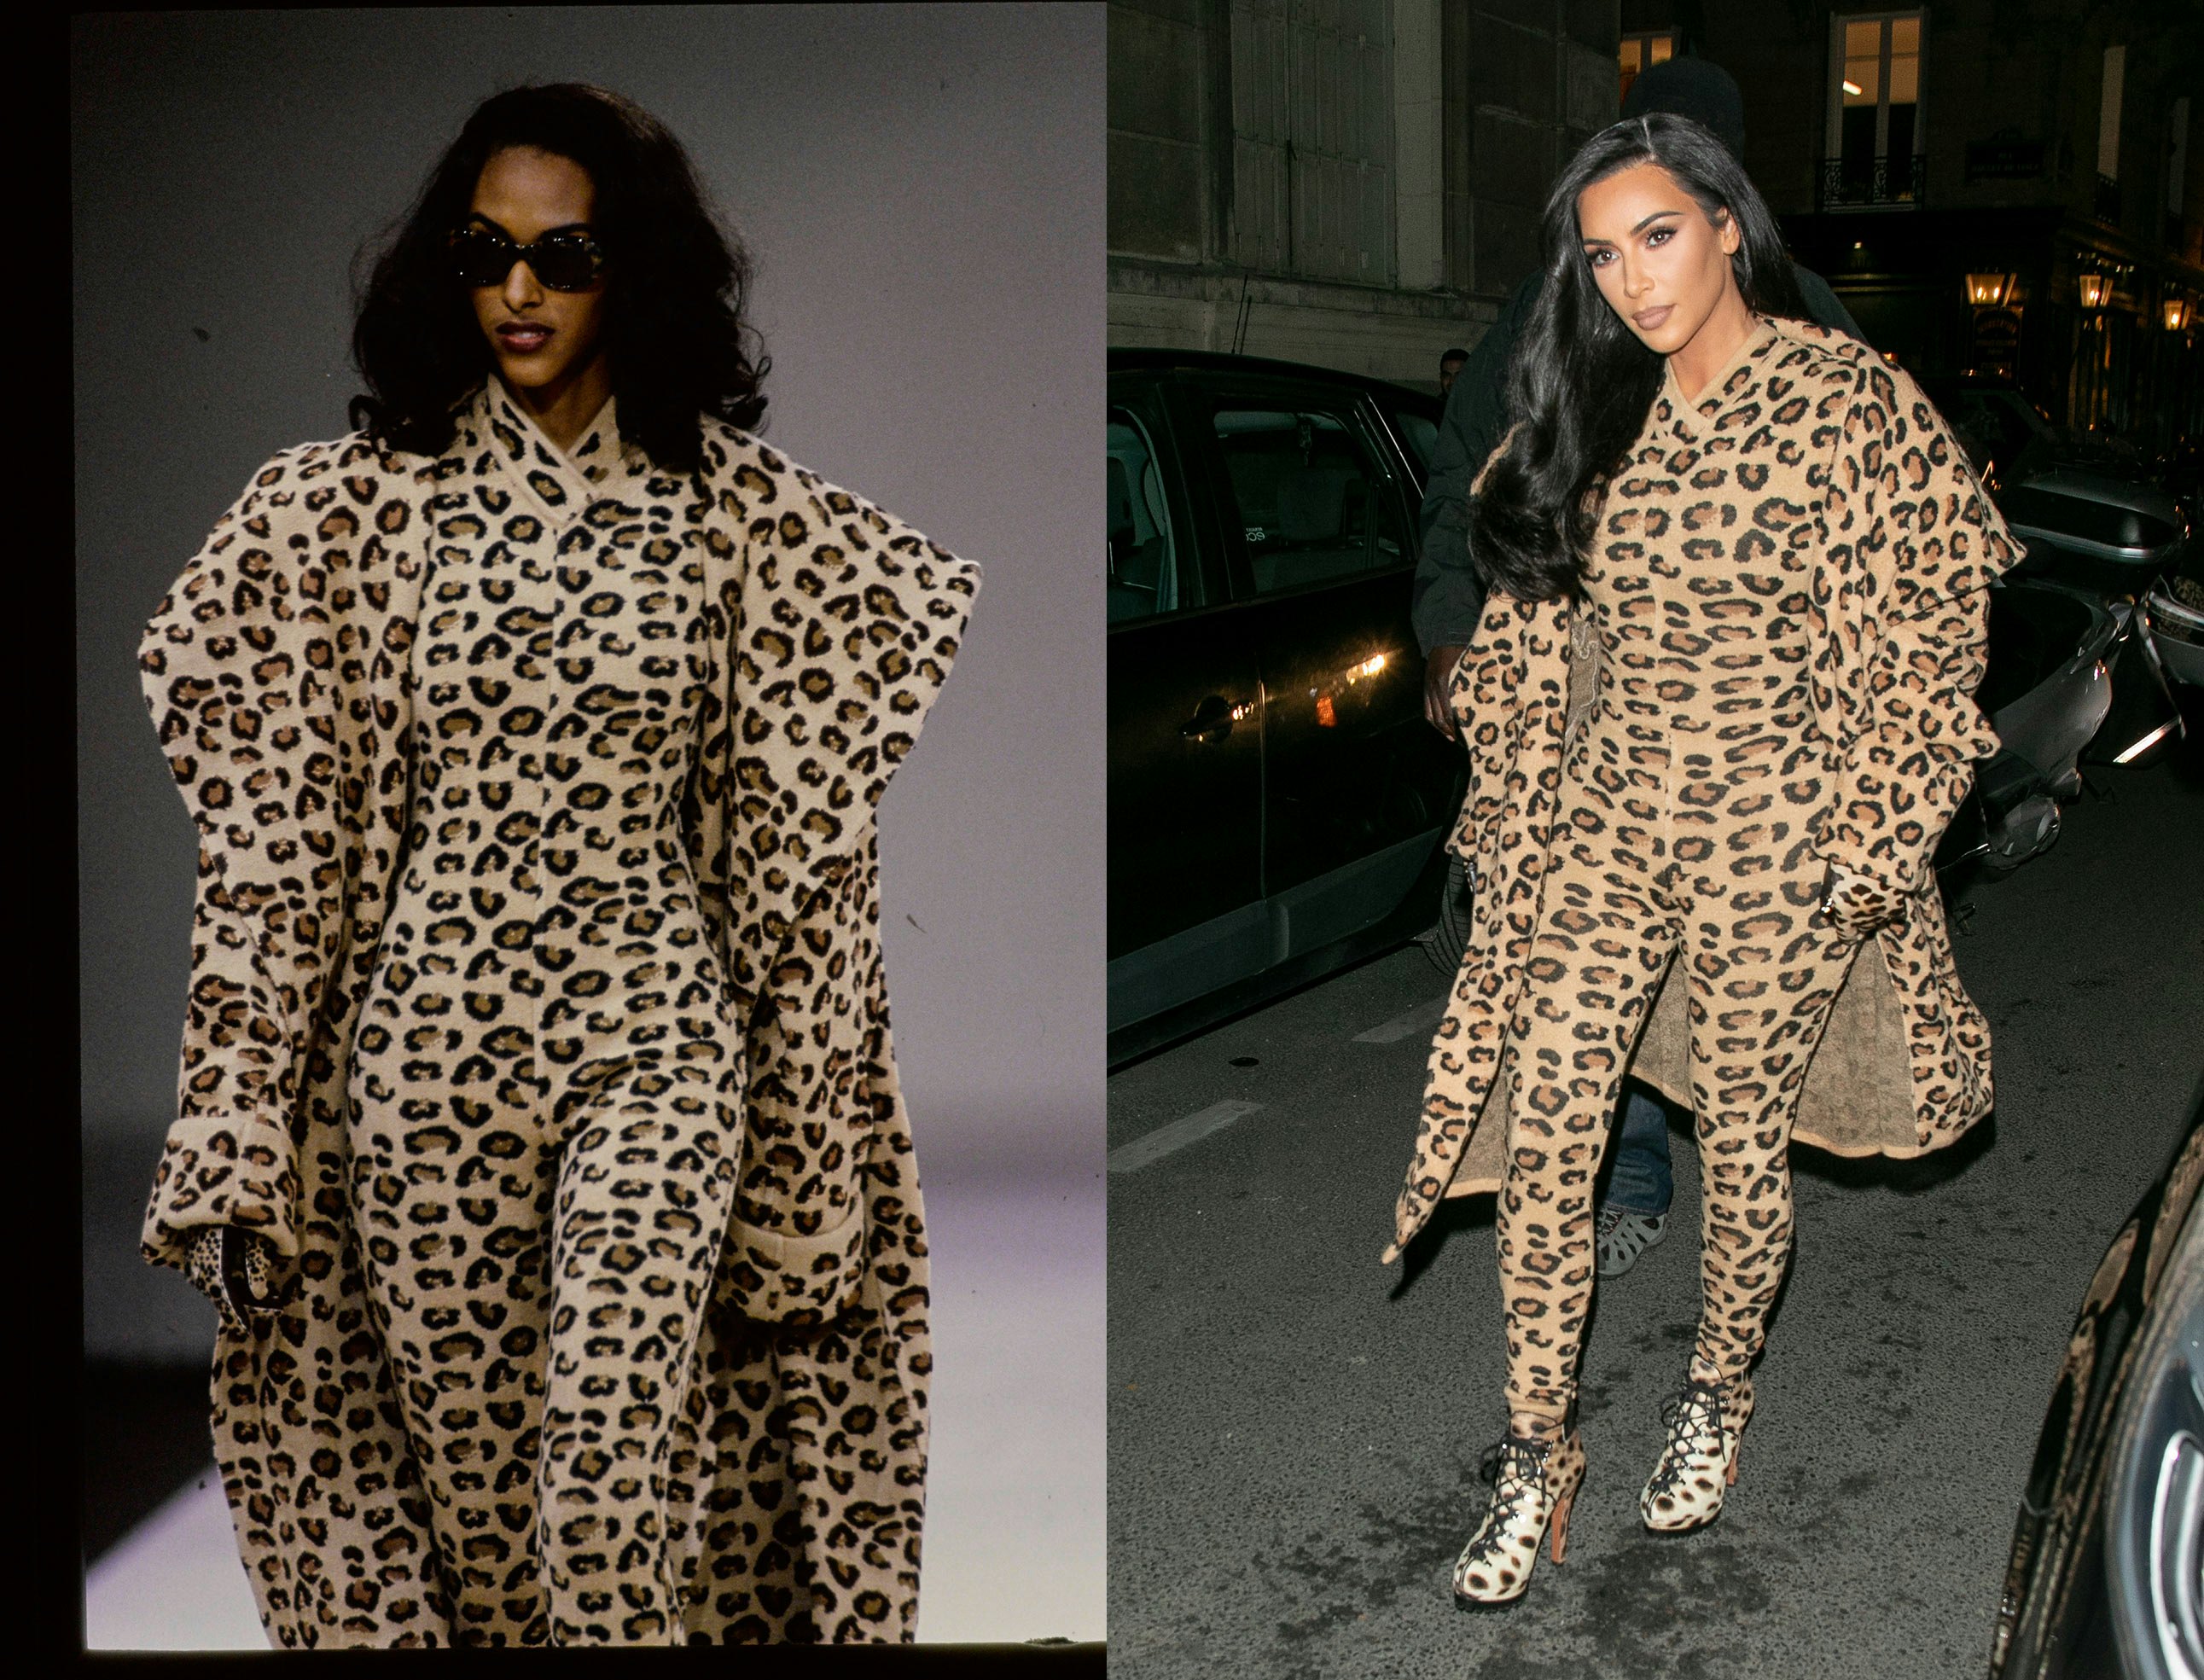 How To Wear Leopard Print, 15 Leopard Print Outfit Ideas - Major Mag